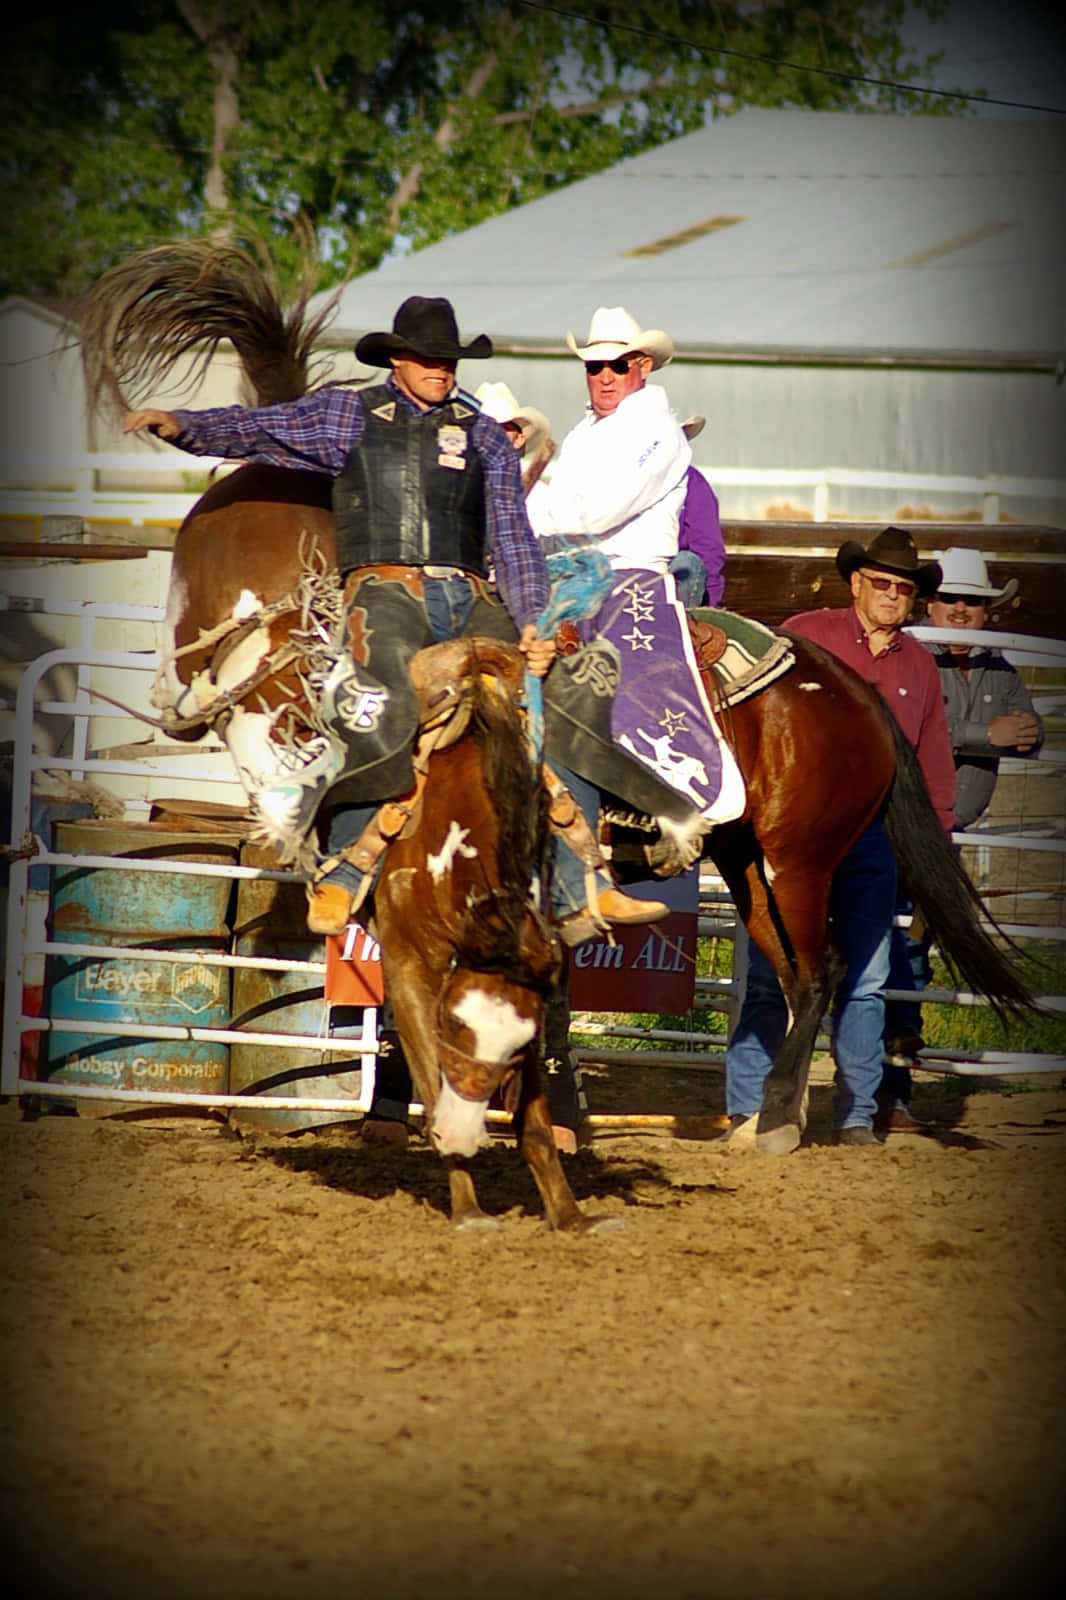 Get ready to cheer for the wildest show on Earth: the rodeo!